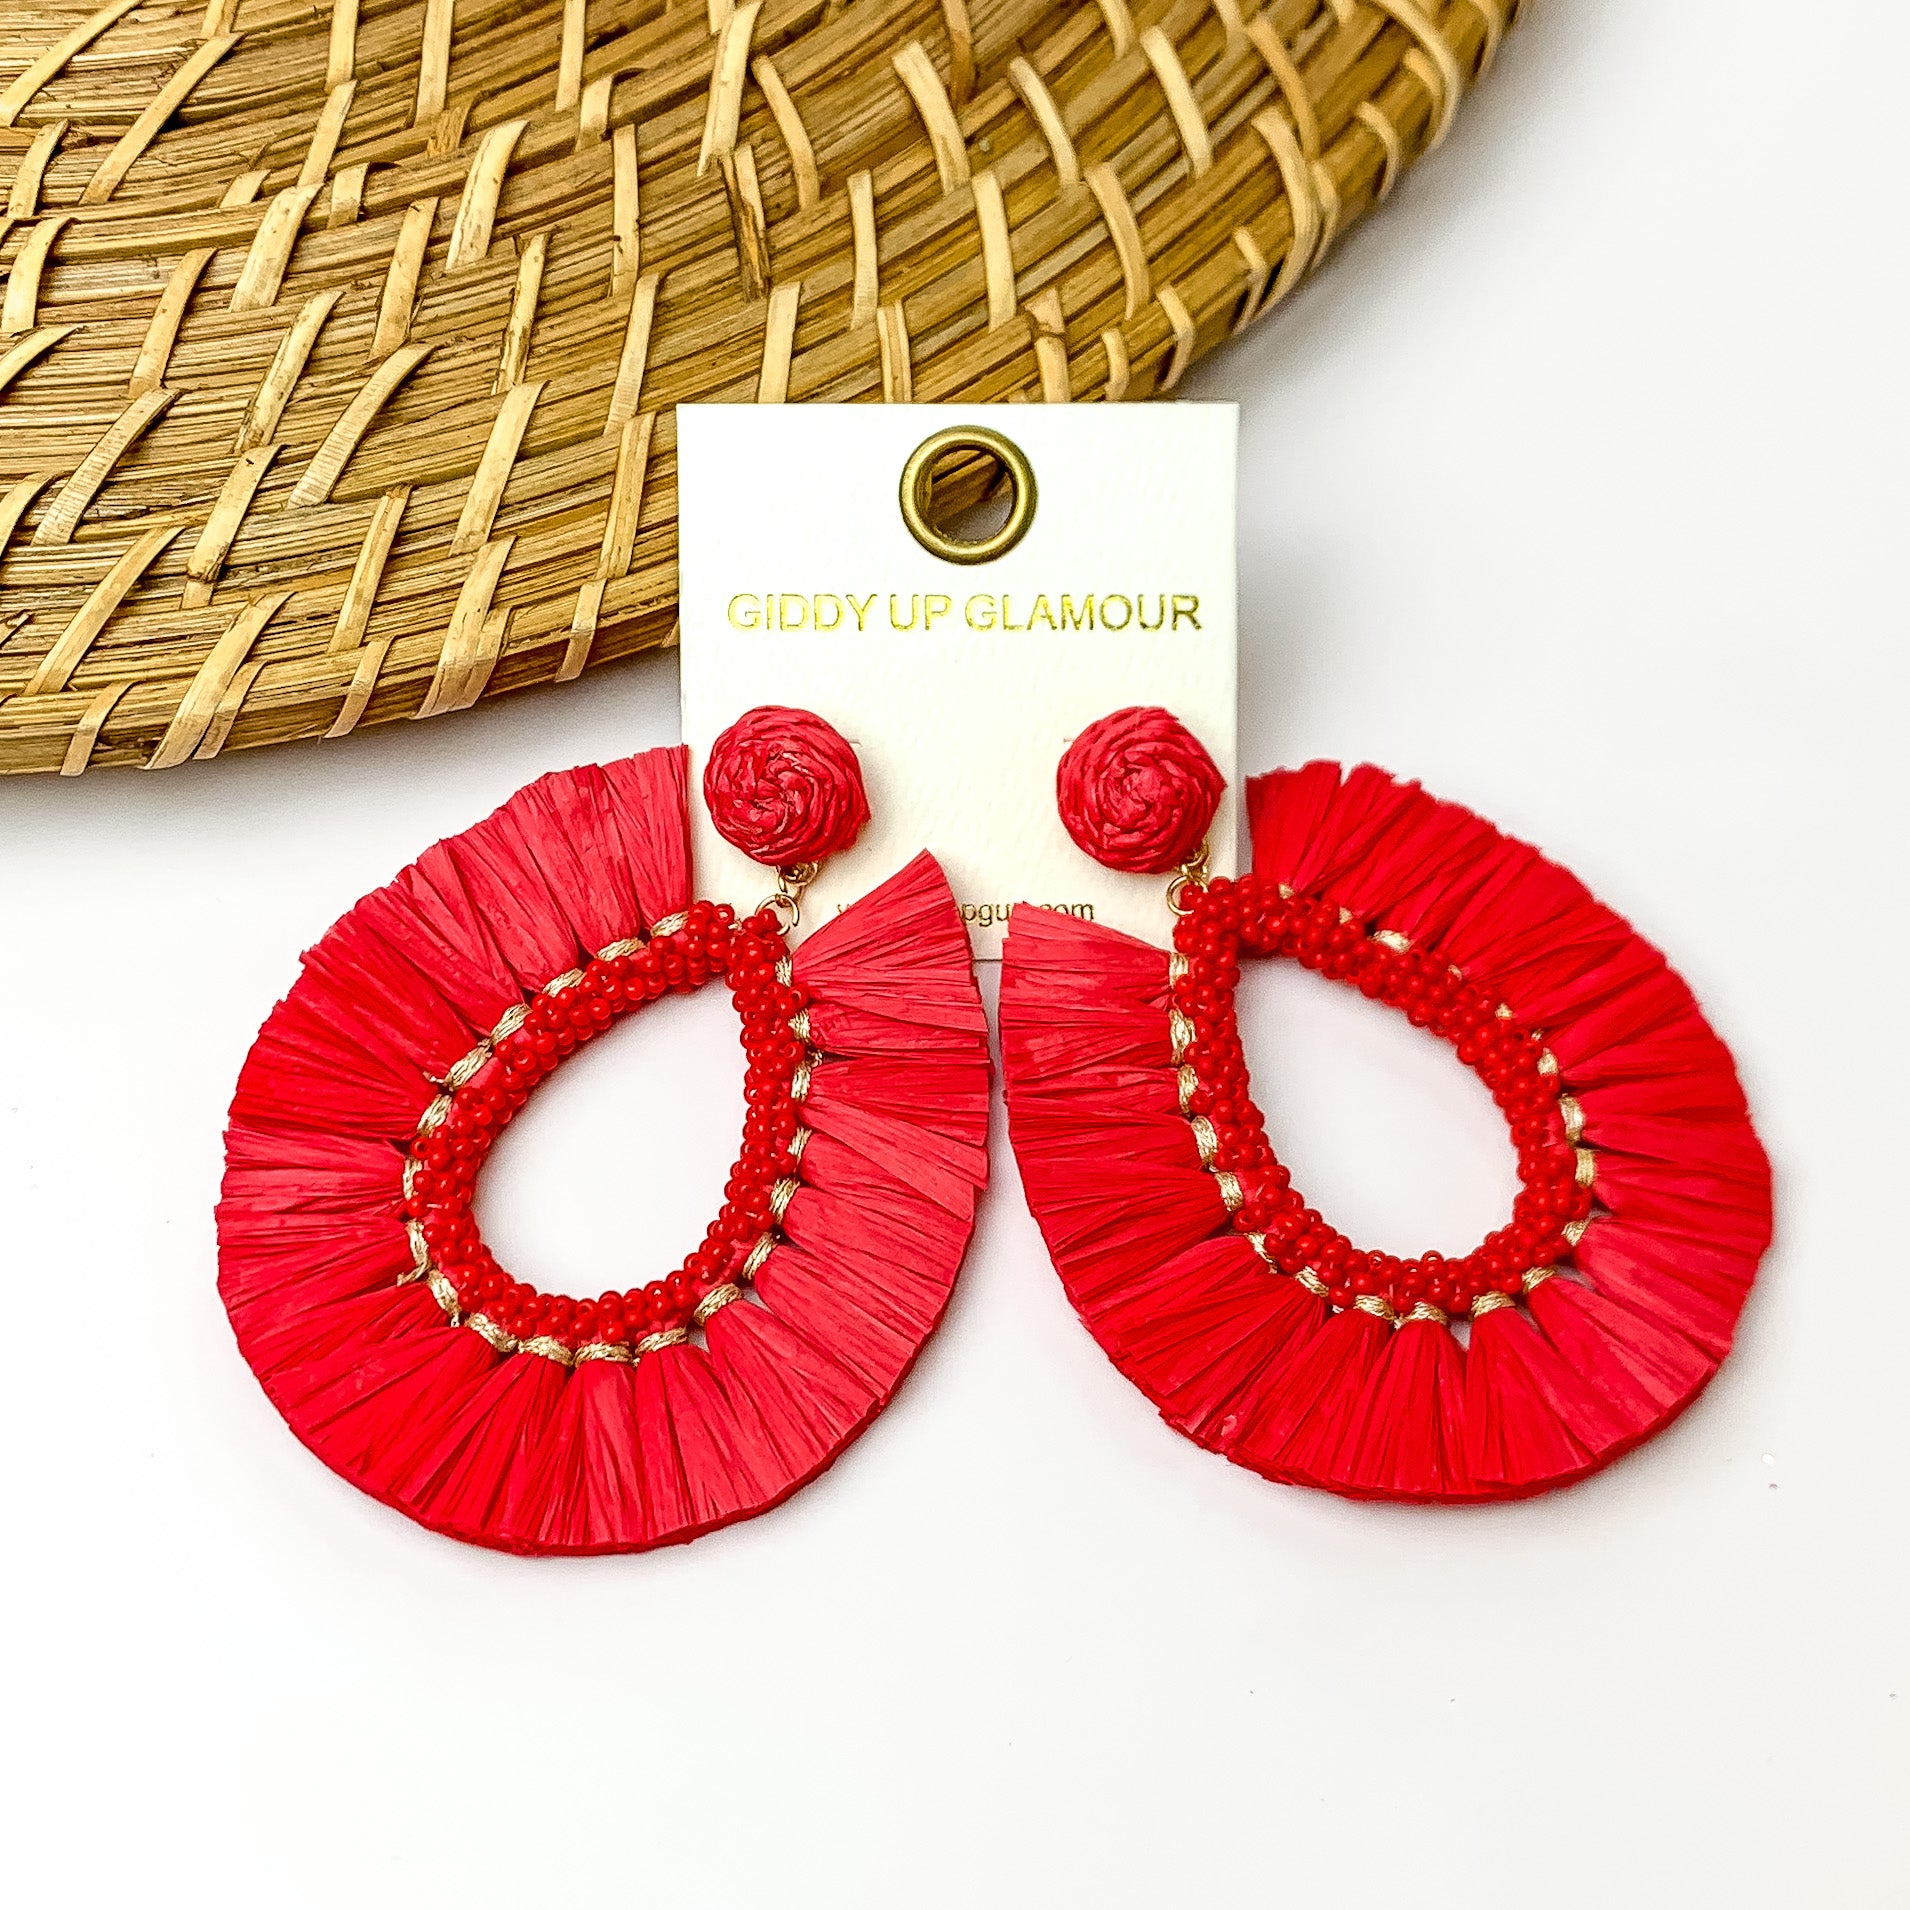 Red fringe open drop hoops with beads on the inside. Pictured on a white background with a wood like decoration in the top left